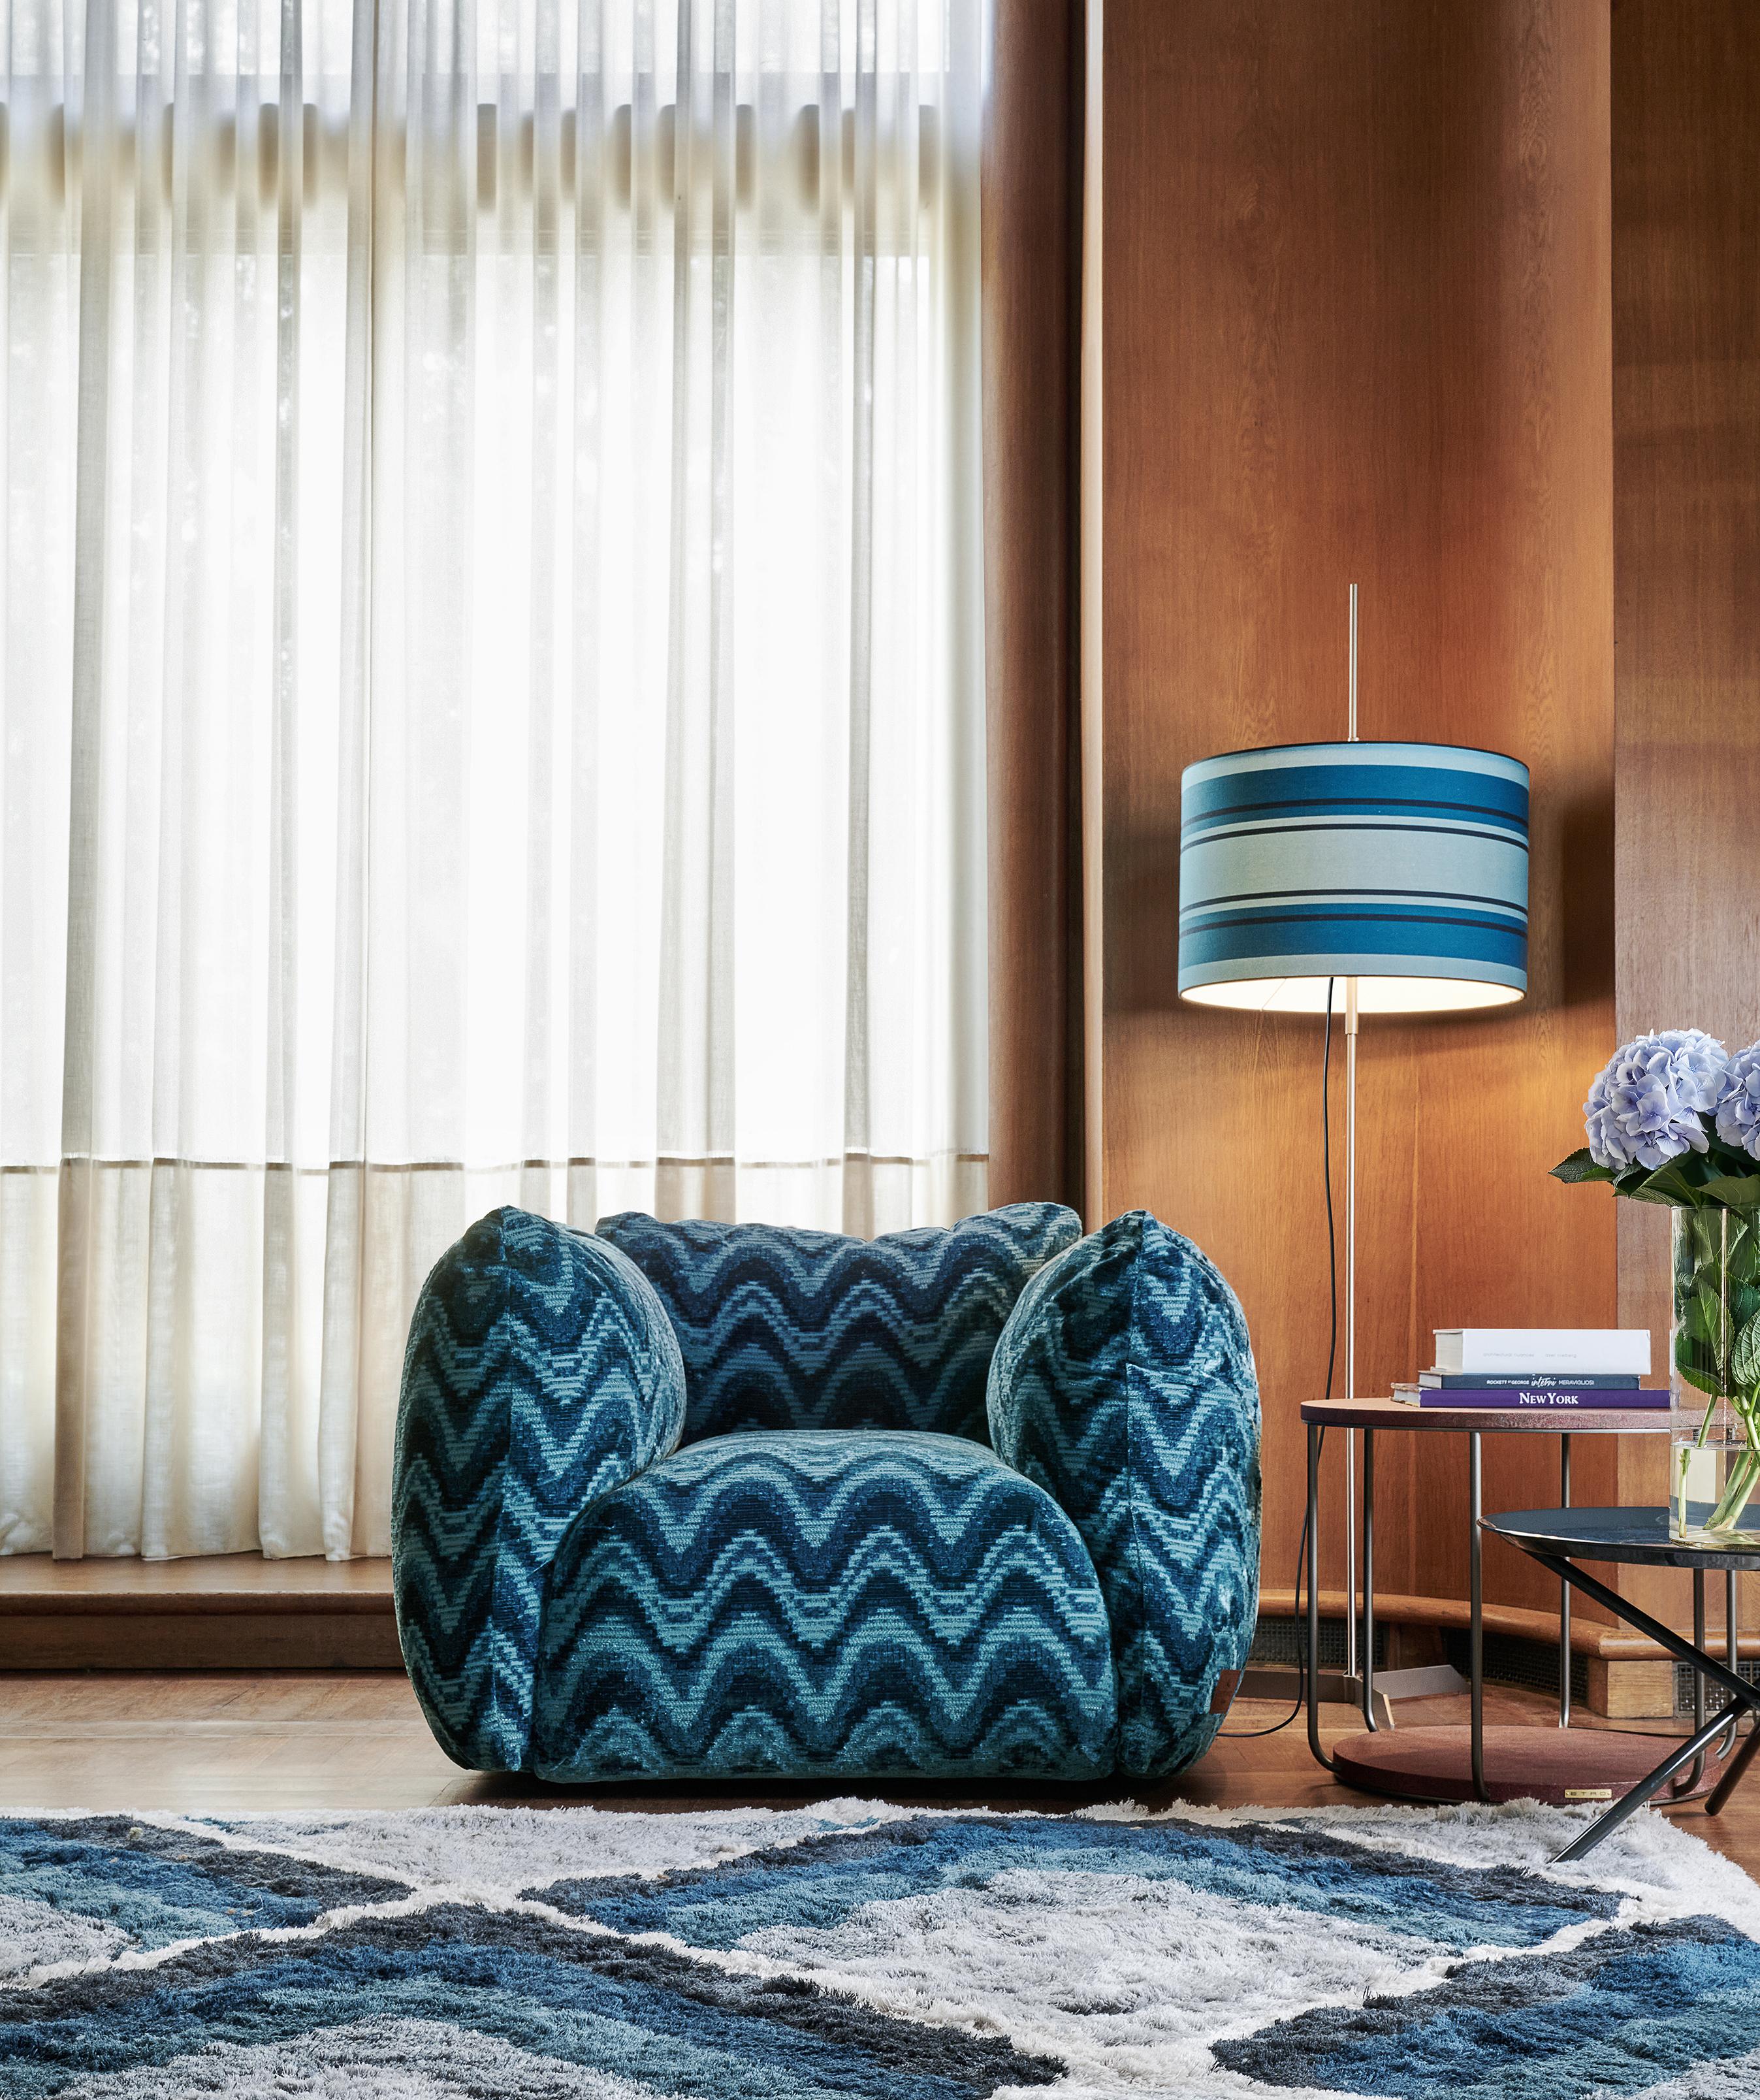 21st Century Cushy Armchair in Blue Jacquard Fabric by Etro Home Interiors In New Condition For Sale In Cantù, Lombardia